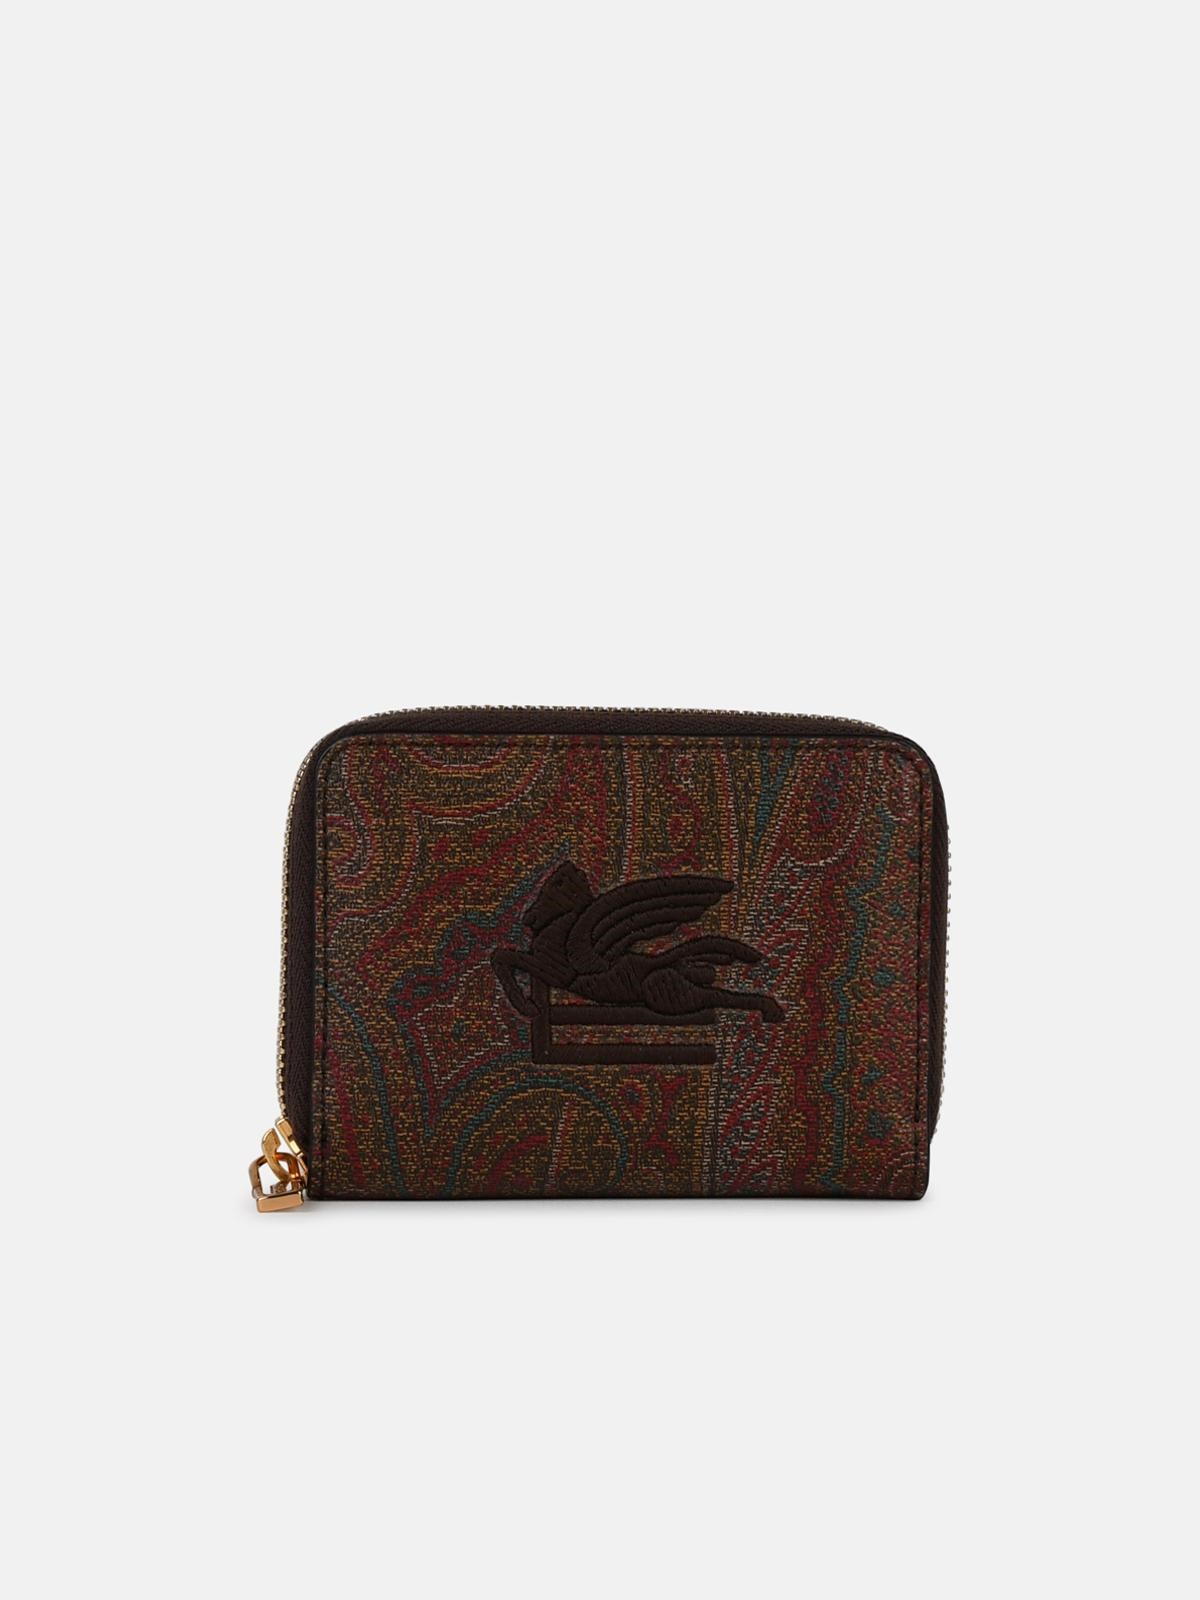 Etro 'arnica' Brown Leather Wallet